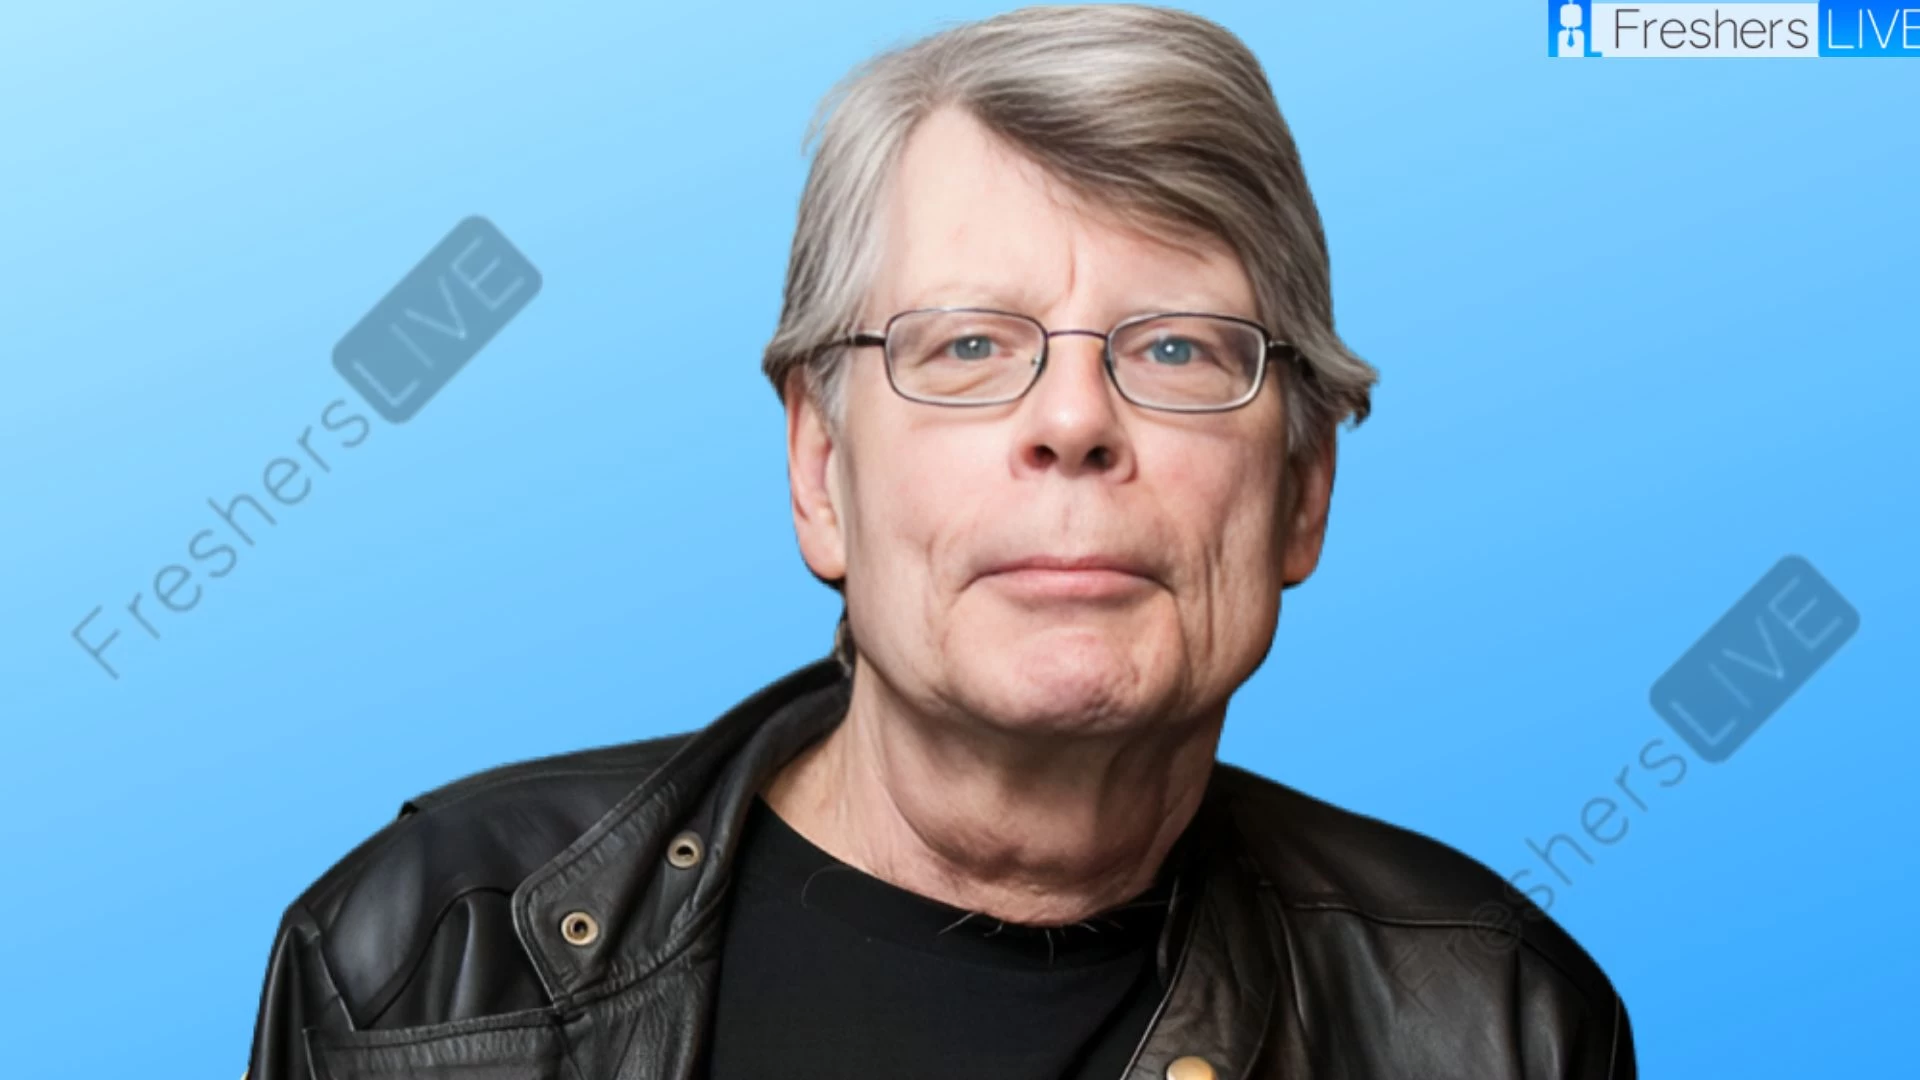 Stephen King Ethnicity, What is Stephen King's Ethnicity?